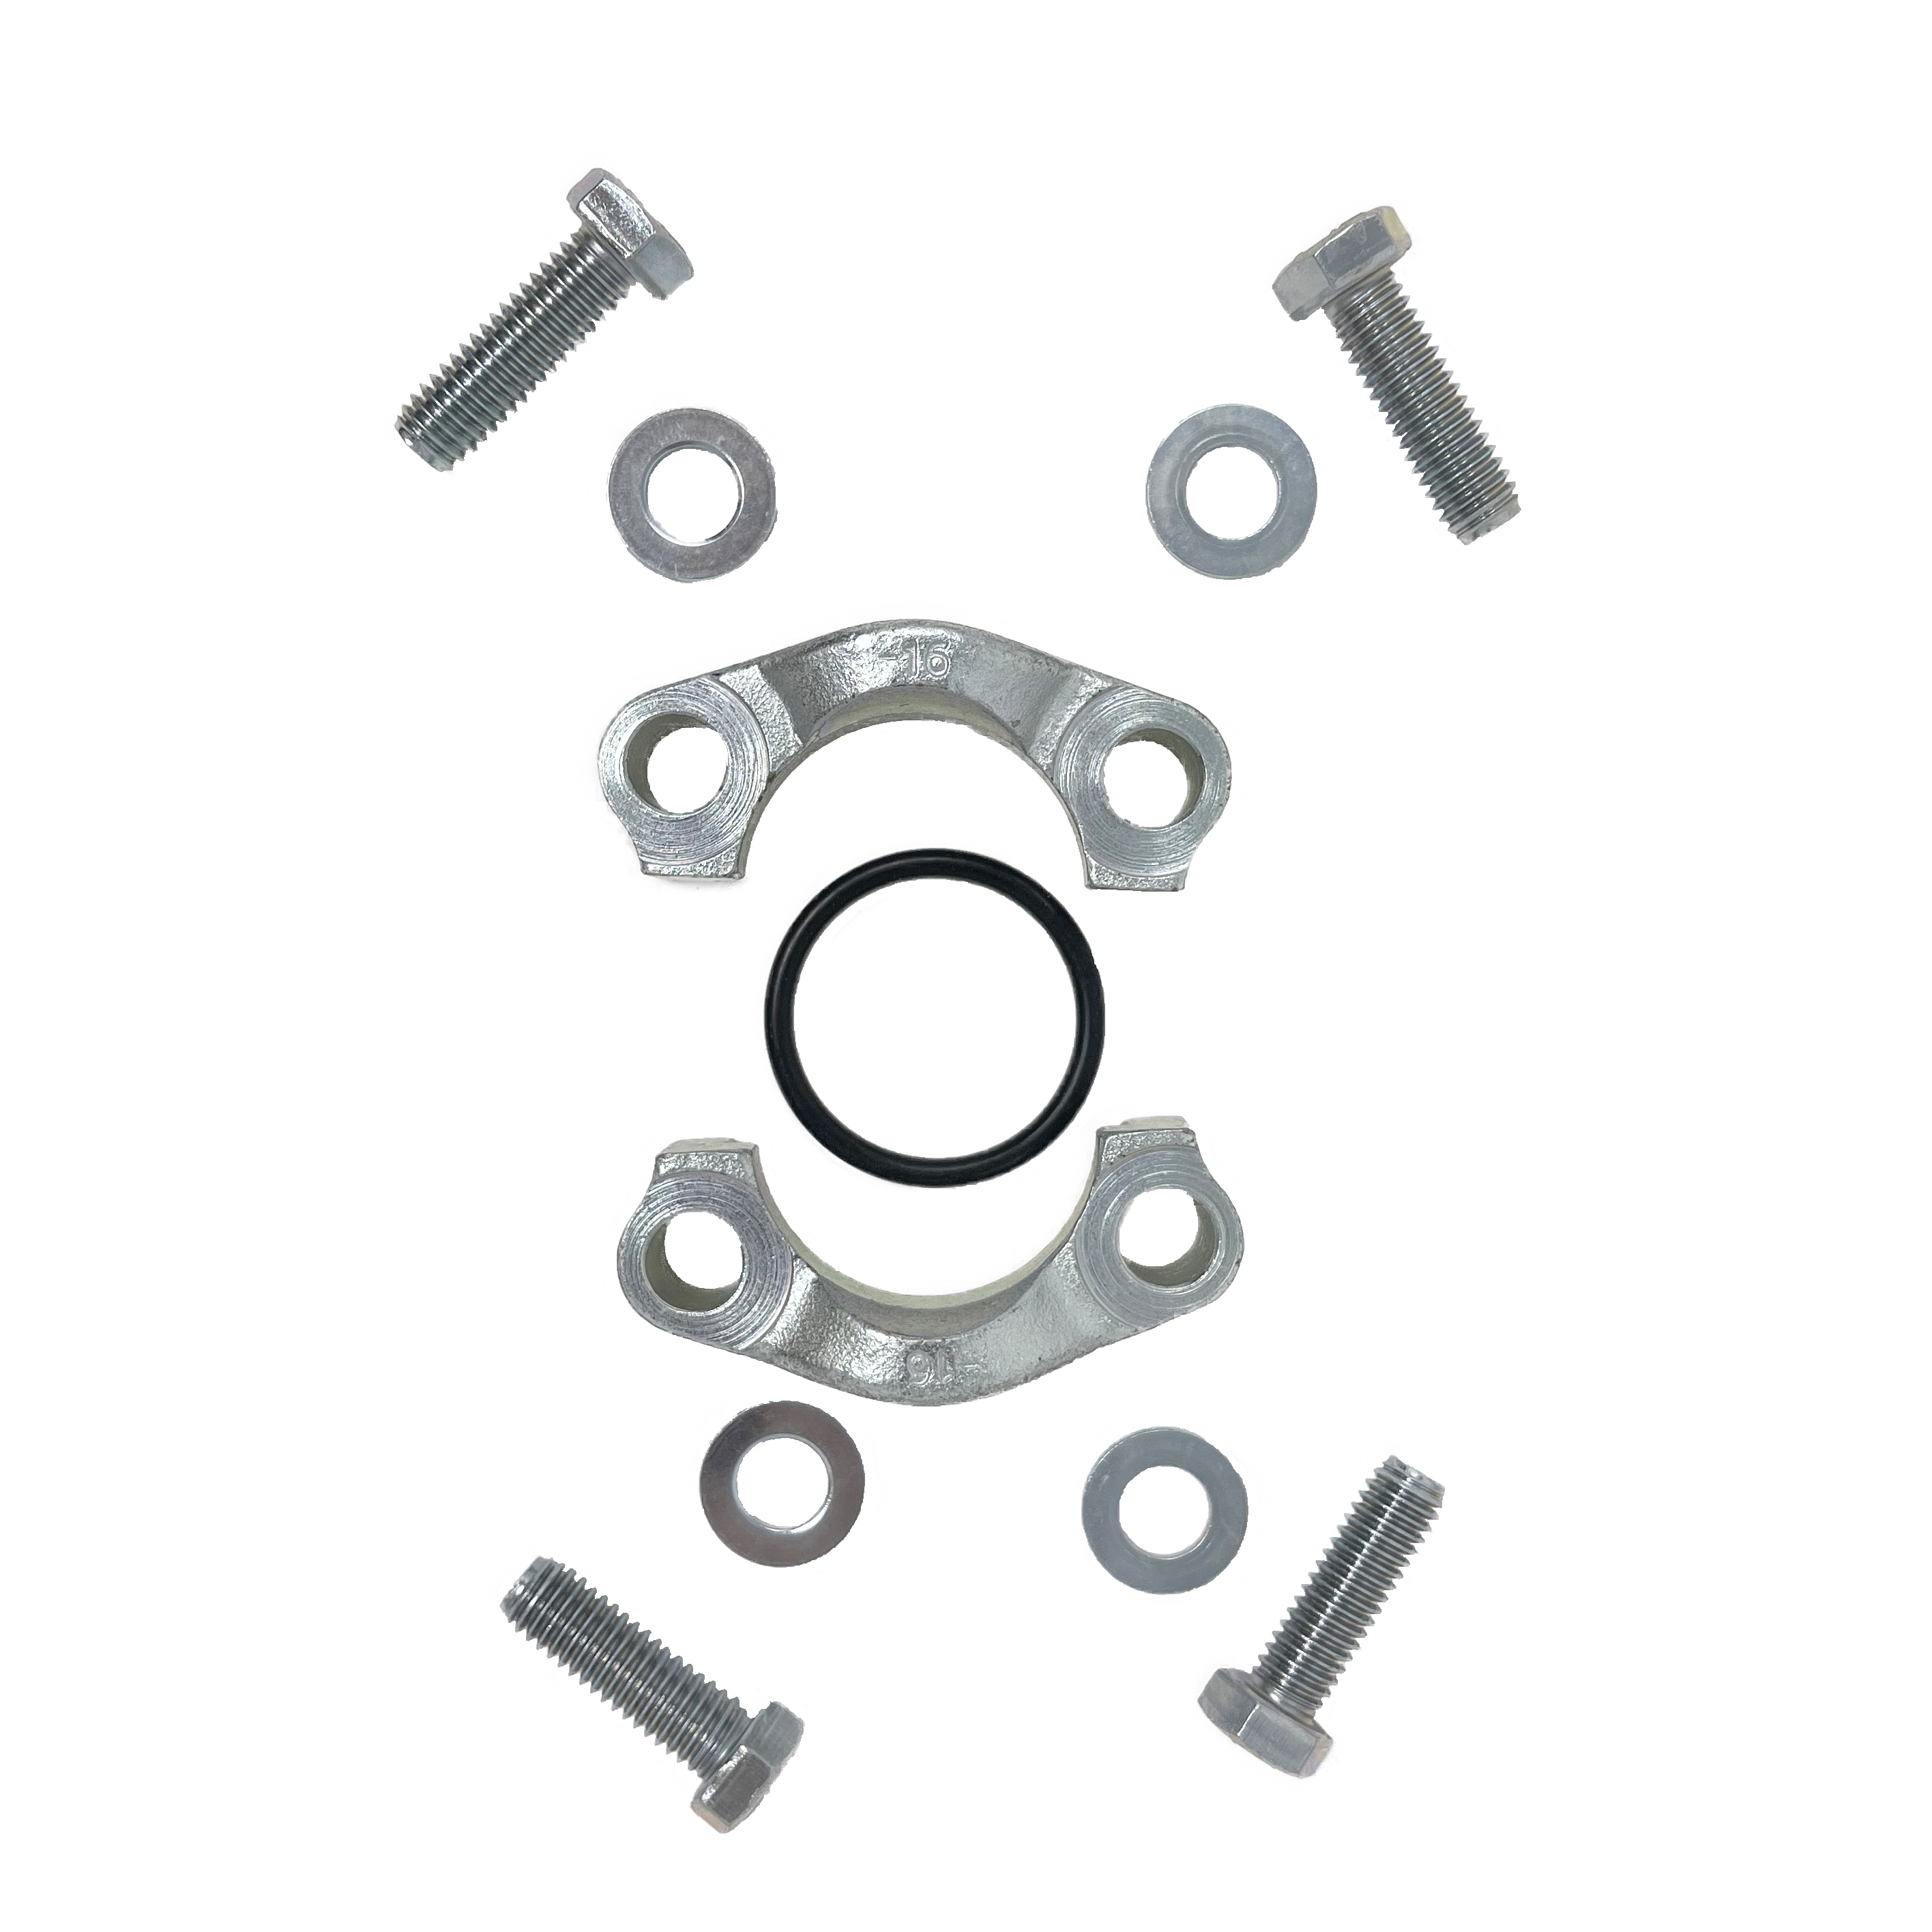 40SFO : AFP Split Flange Kit, Steel, 2.5" Code 61, 3000psi, Includes two (2) halves, four (4) bolts, four (4) washers, and one (1) O-Ring